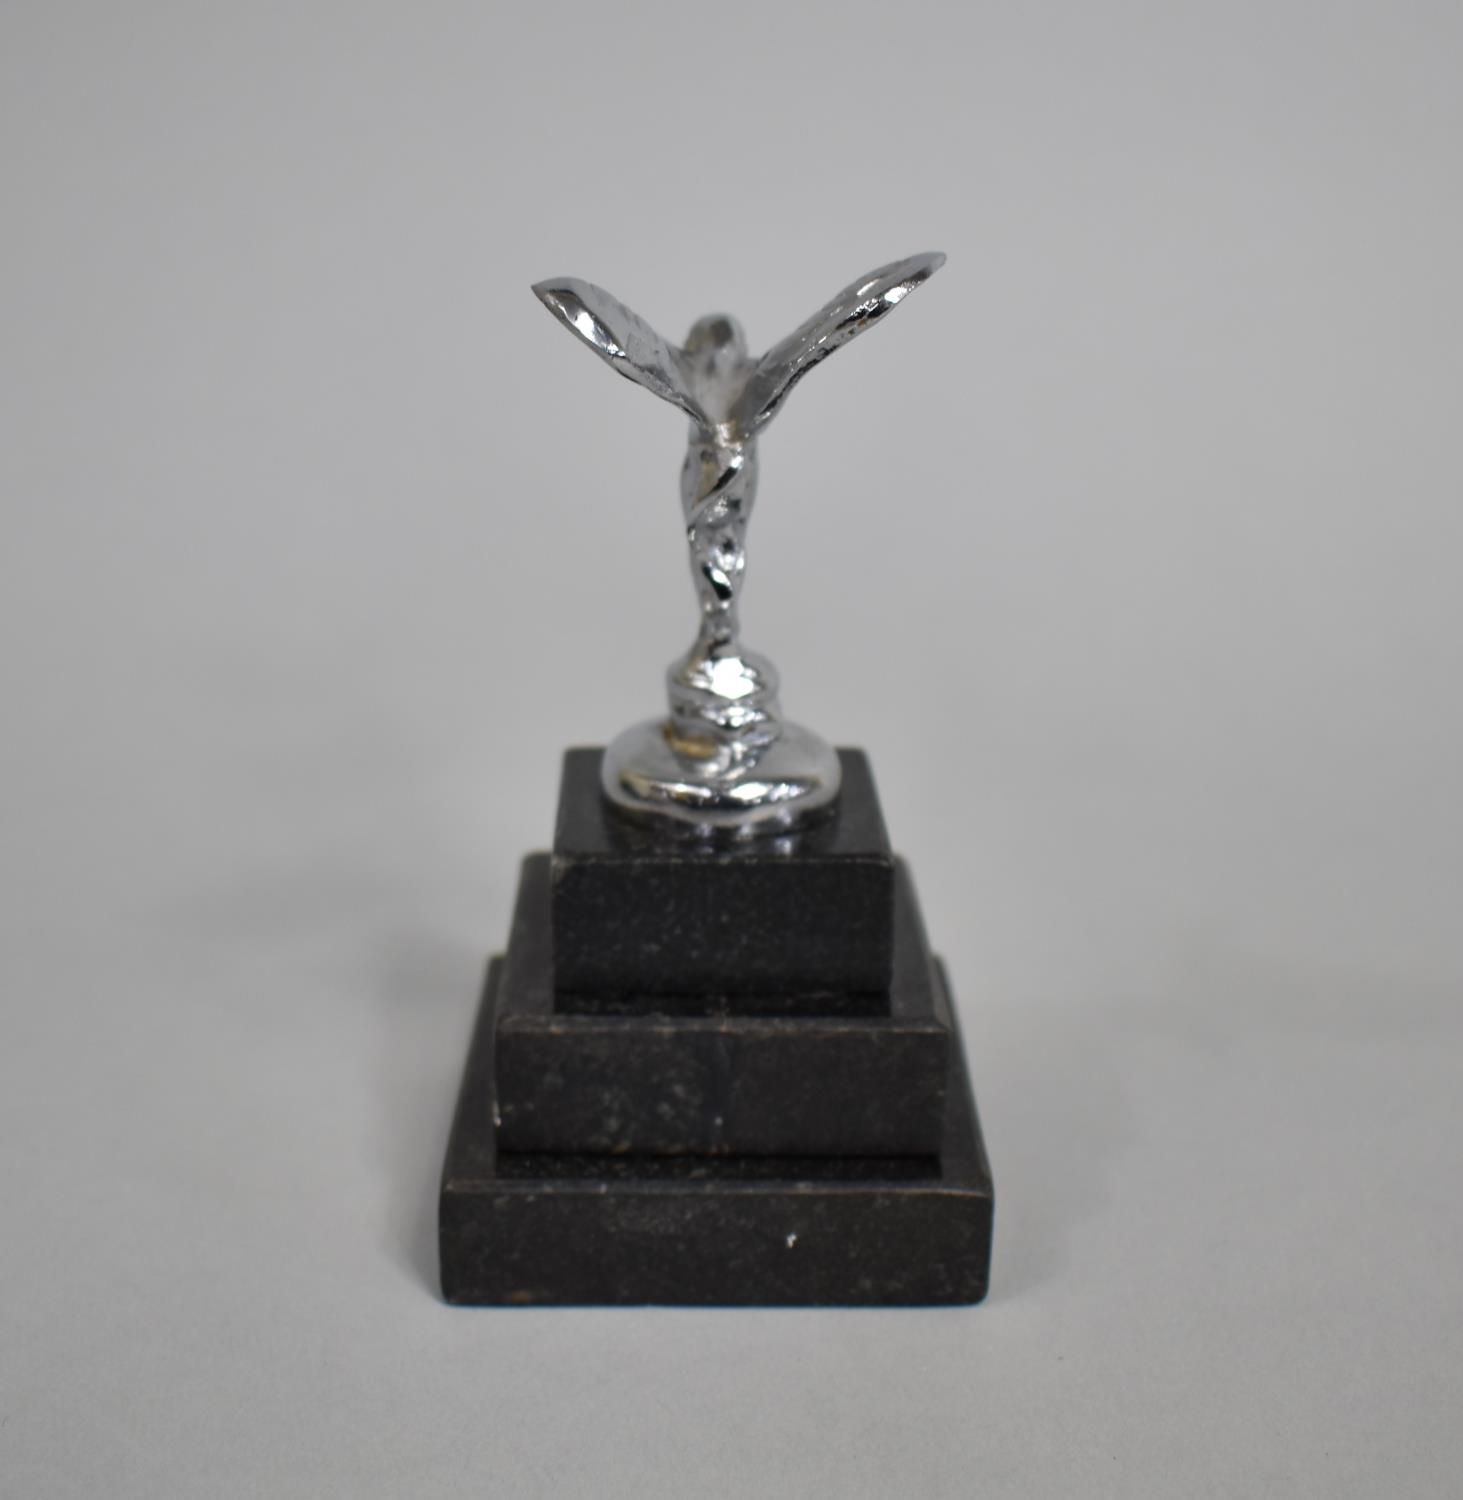 A Small Model of The Spirit of Ecstasy on Stepped Plinth, Overall Height 12cms - Image 4 of 5